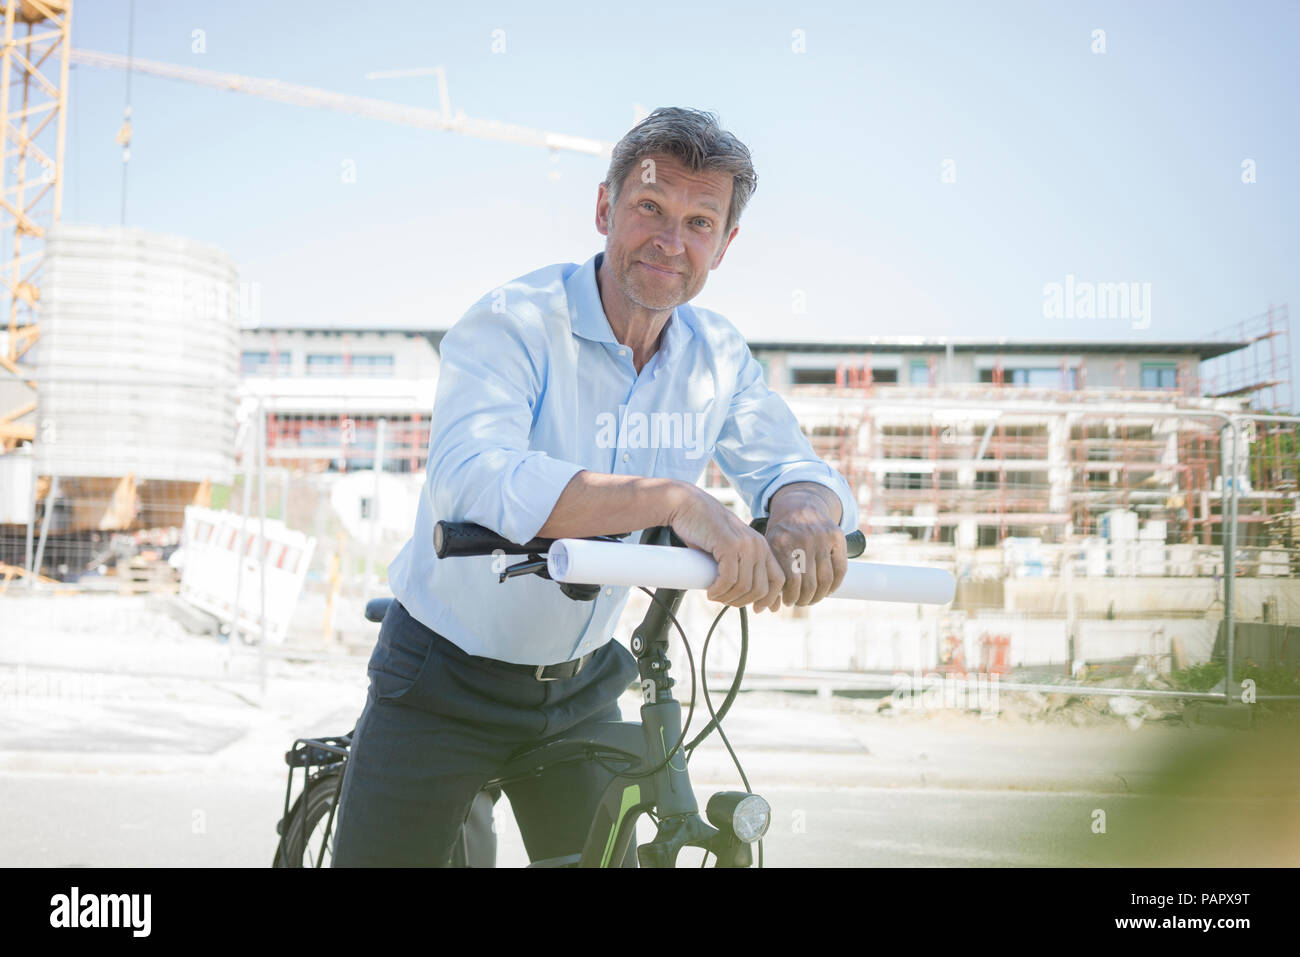 Portrait of man with e-bike on construction site Stock Photo